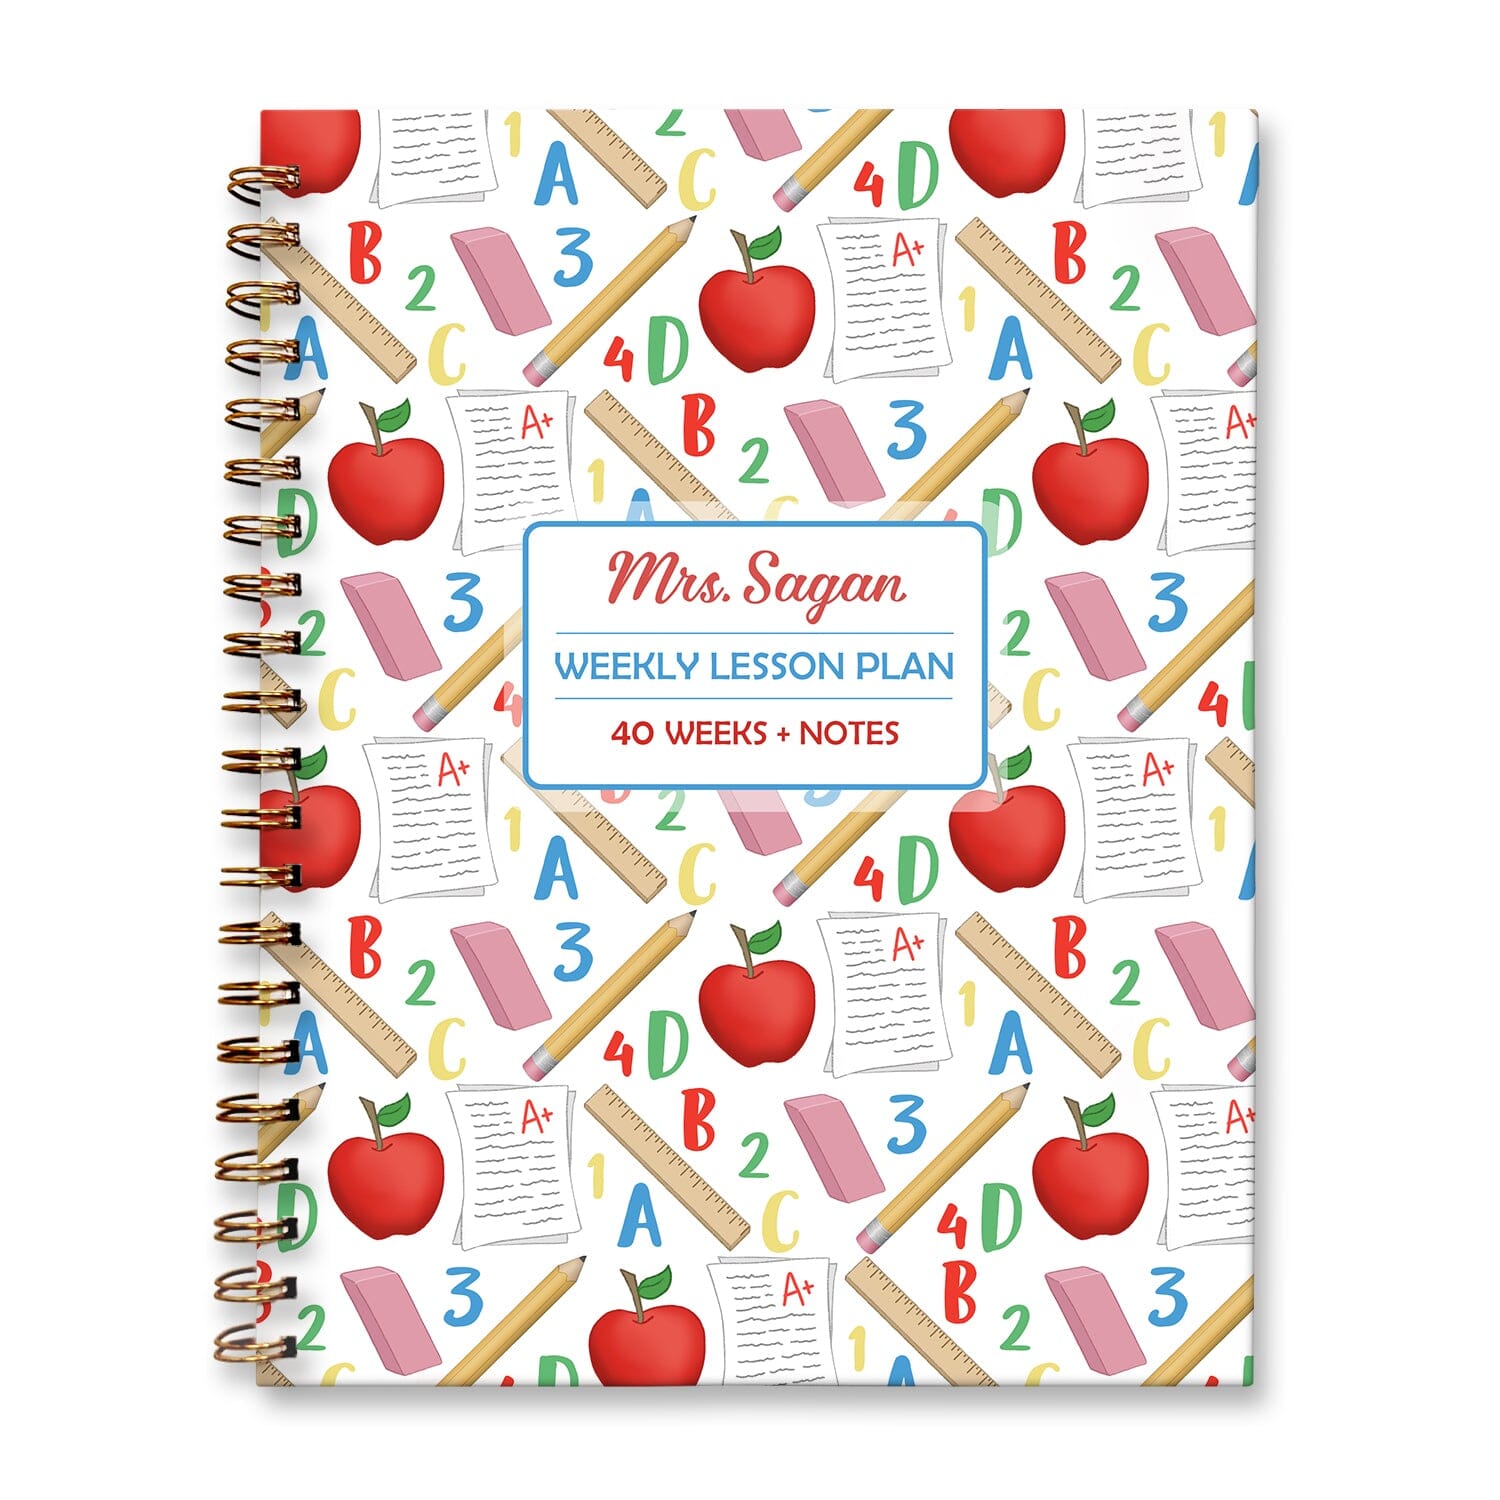 Personalized School Pattern Weekly Lesson Plan Book at Artistically Invited. Hardcover planner book for teachers or homeschooling.